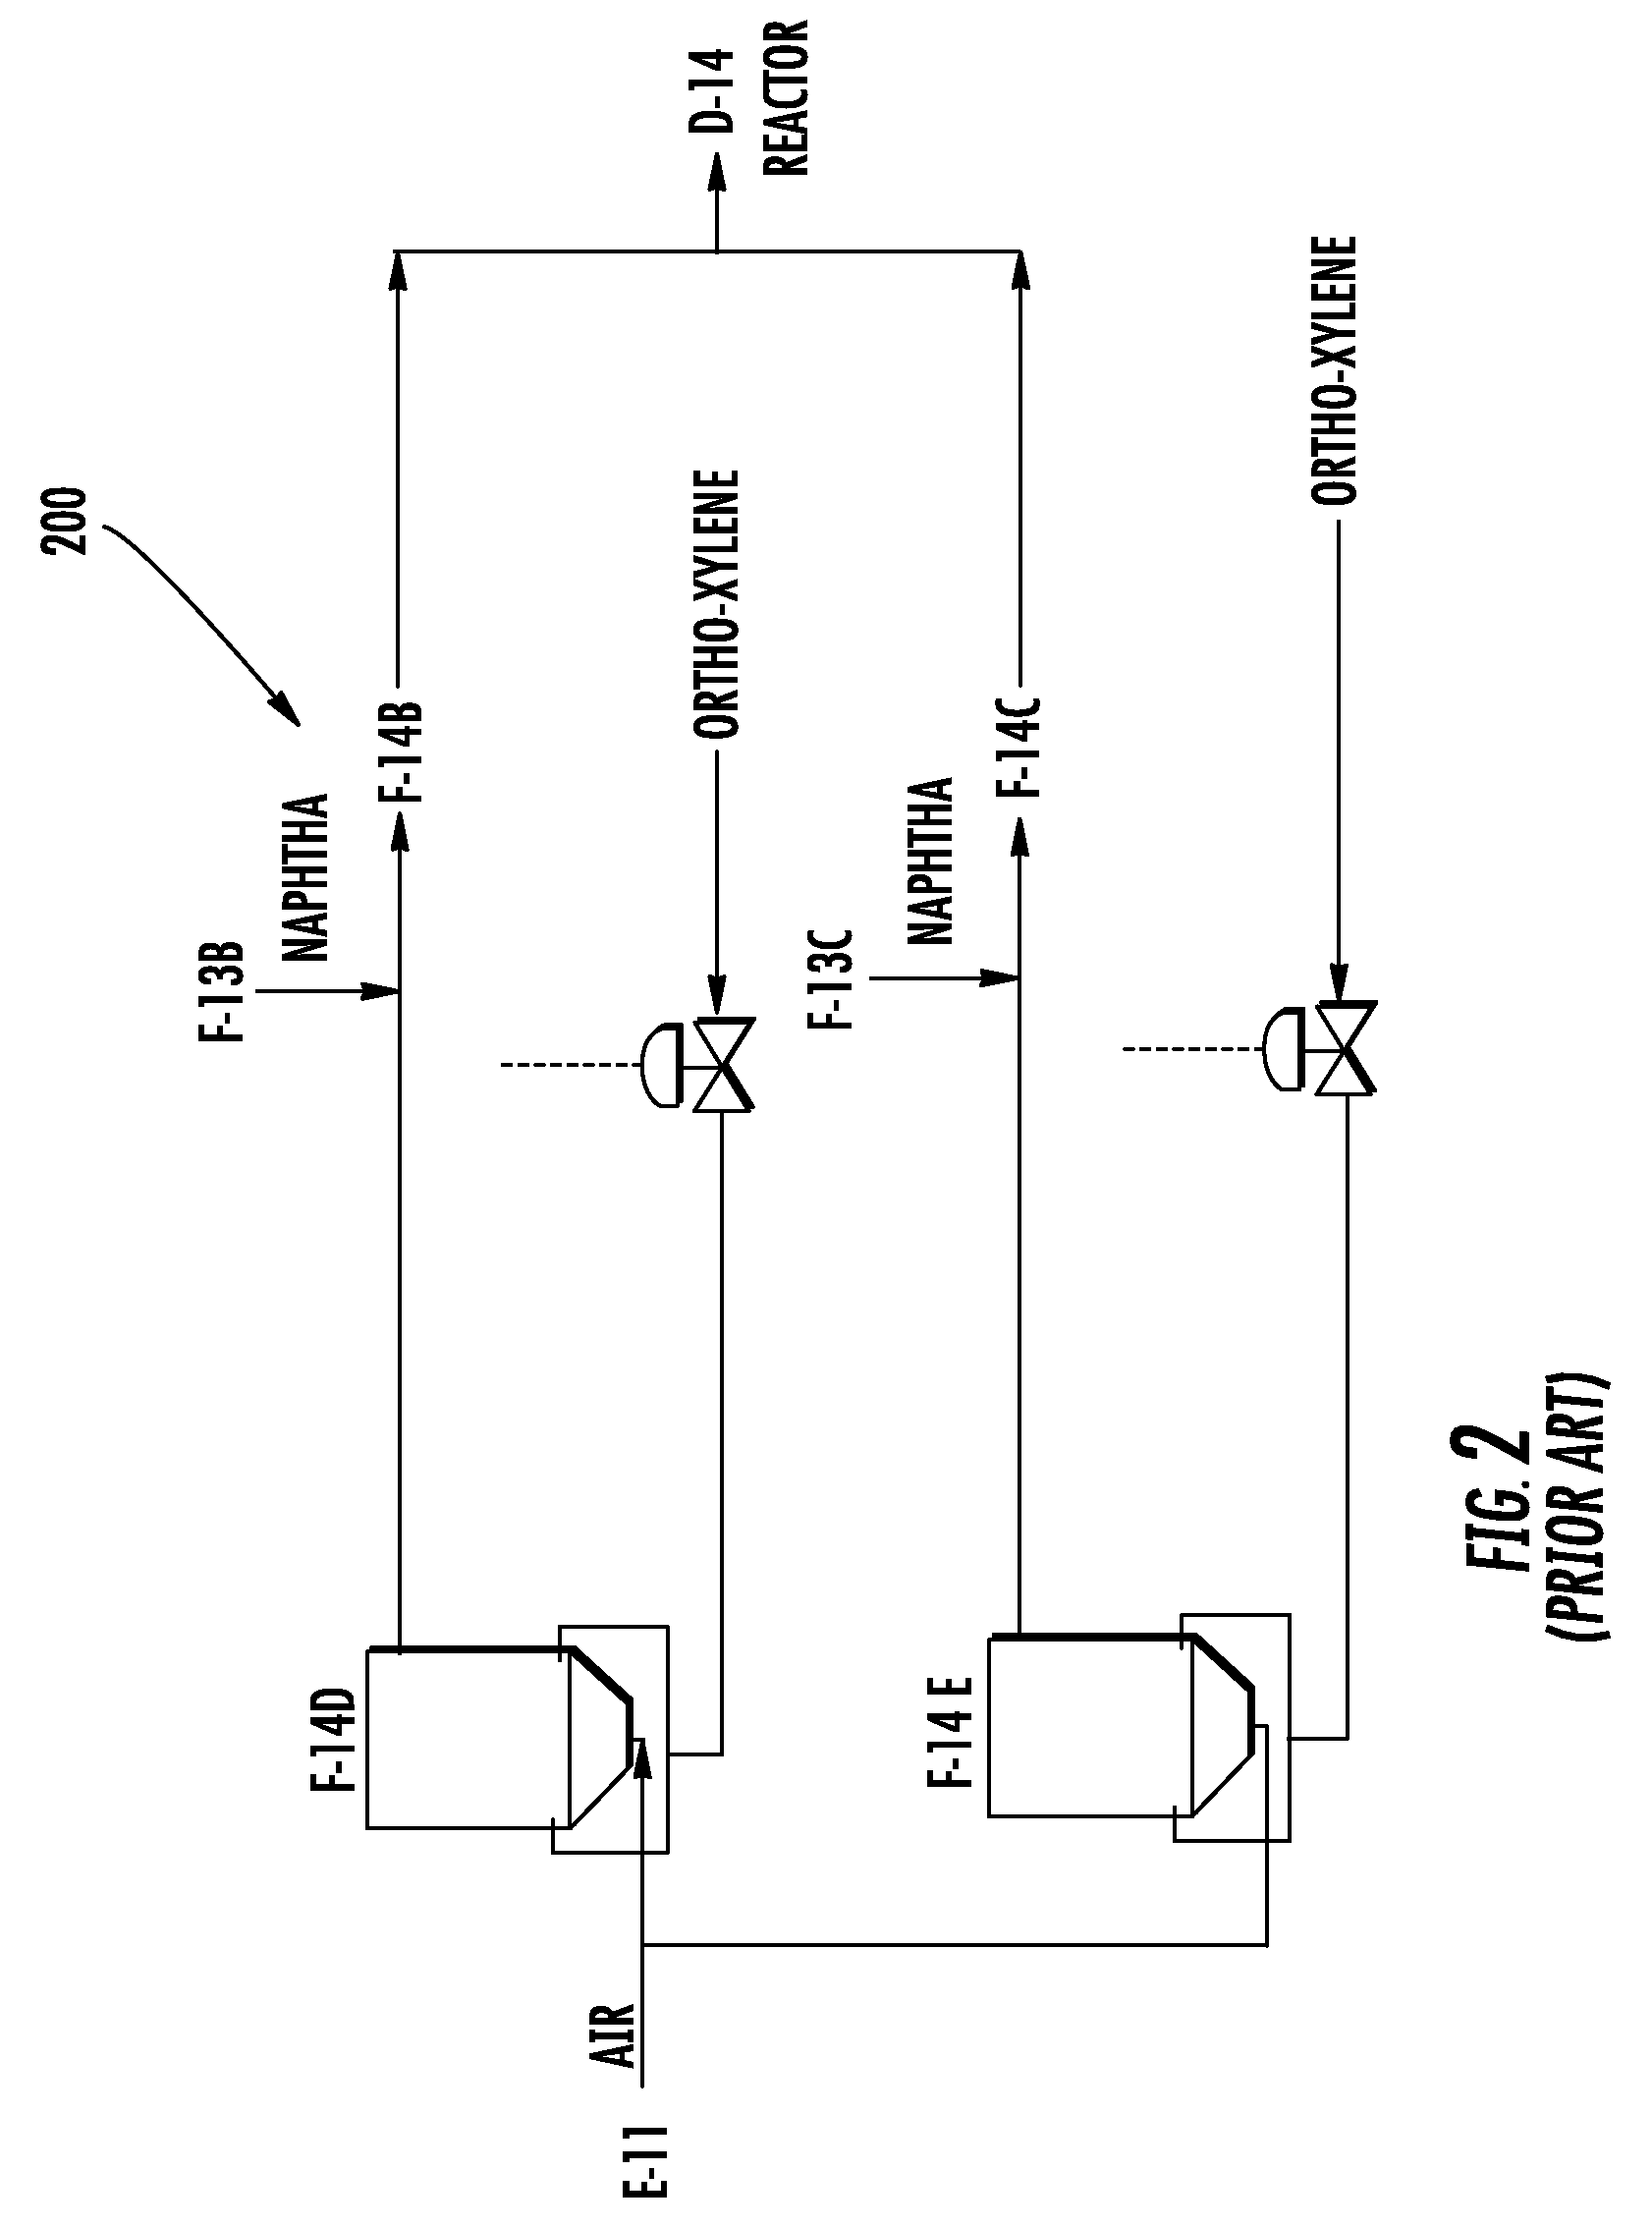 Multivariable process controller and methodology for controlling catalyzed chemical reaction to form phthalic anhydride and other functionalized aromatics